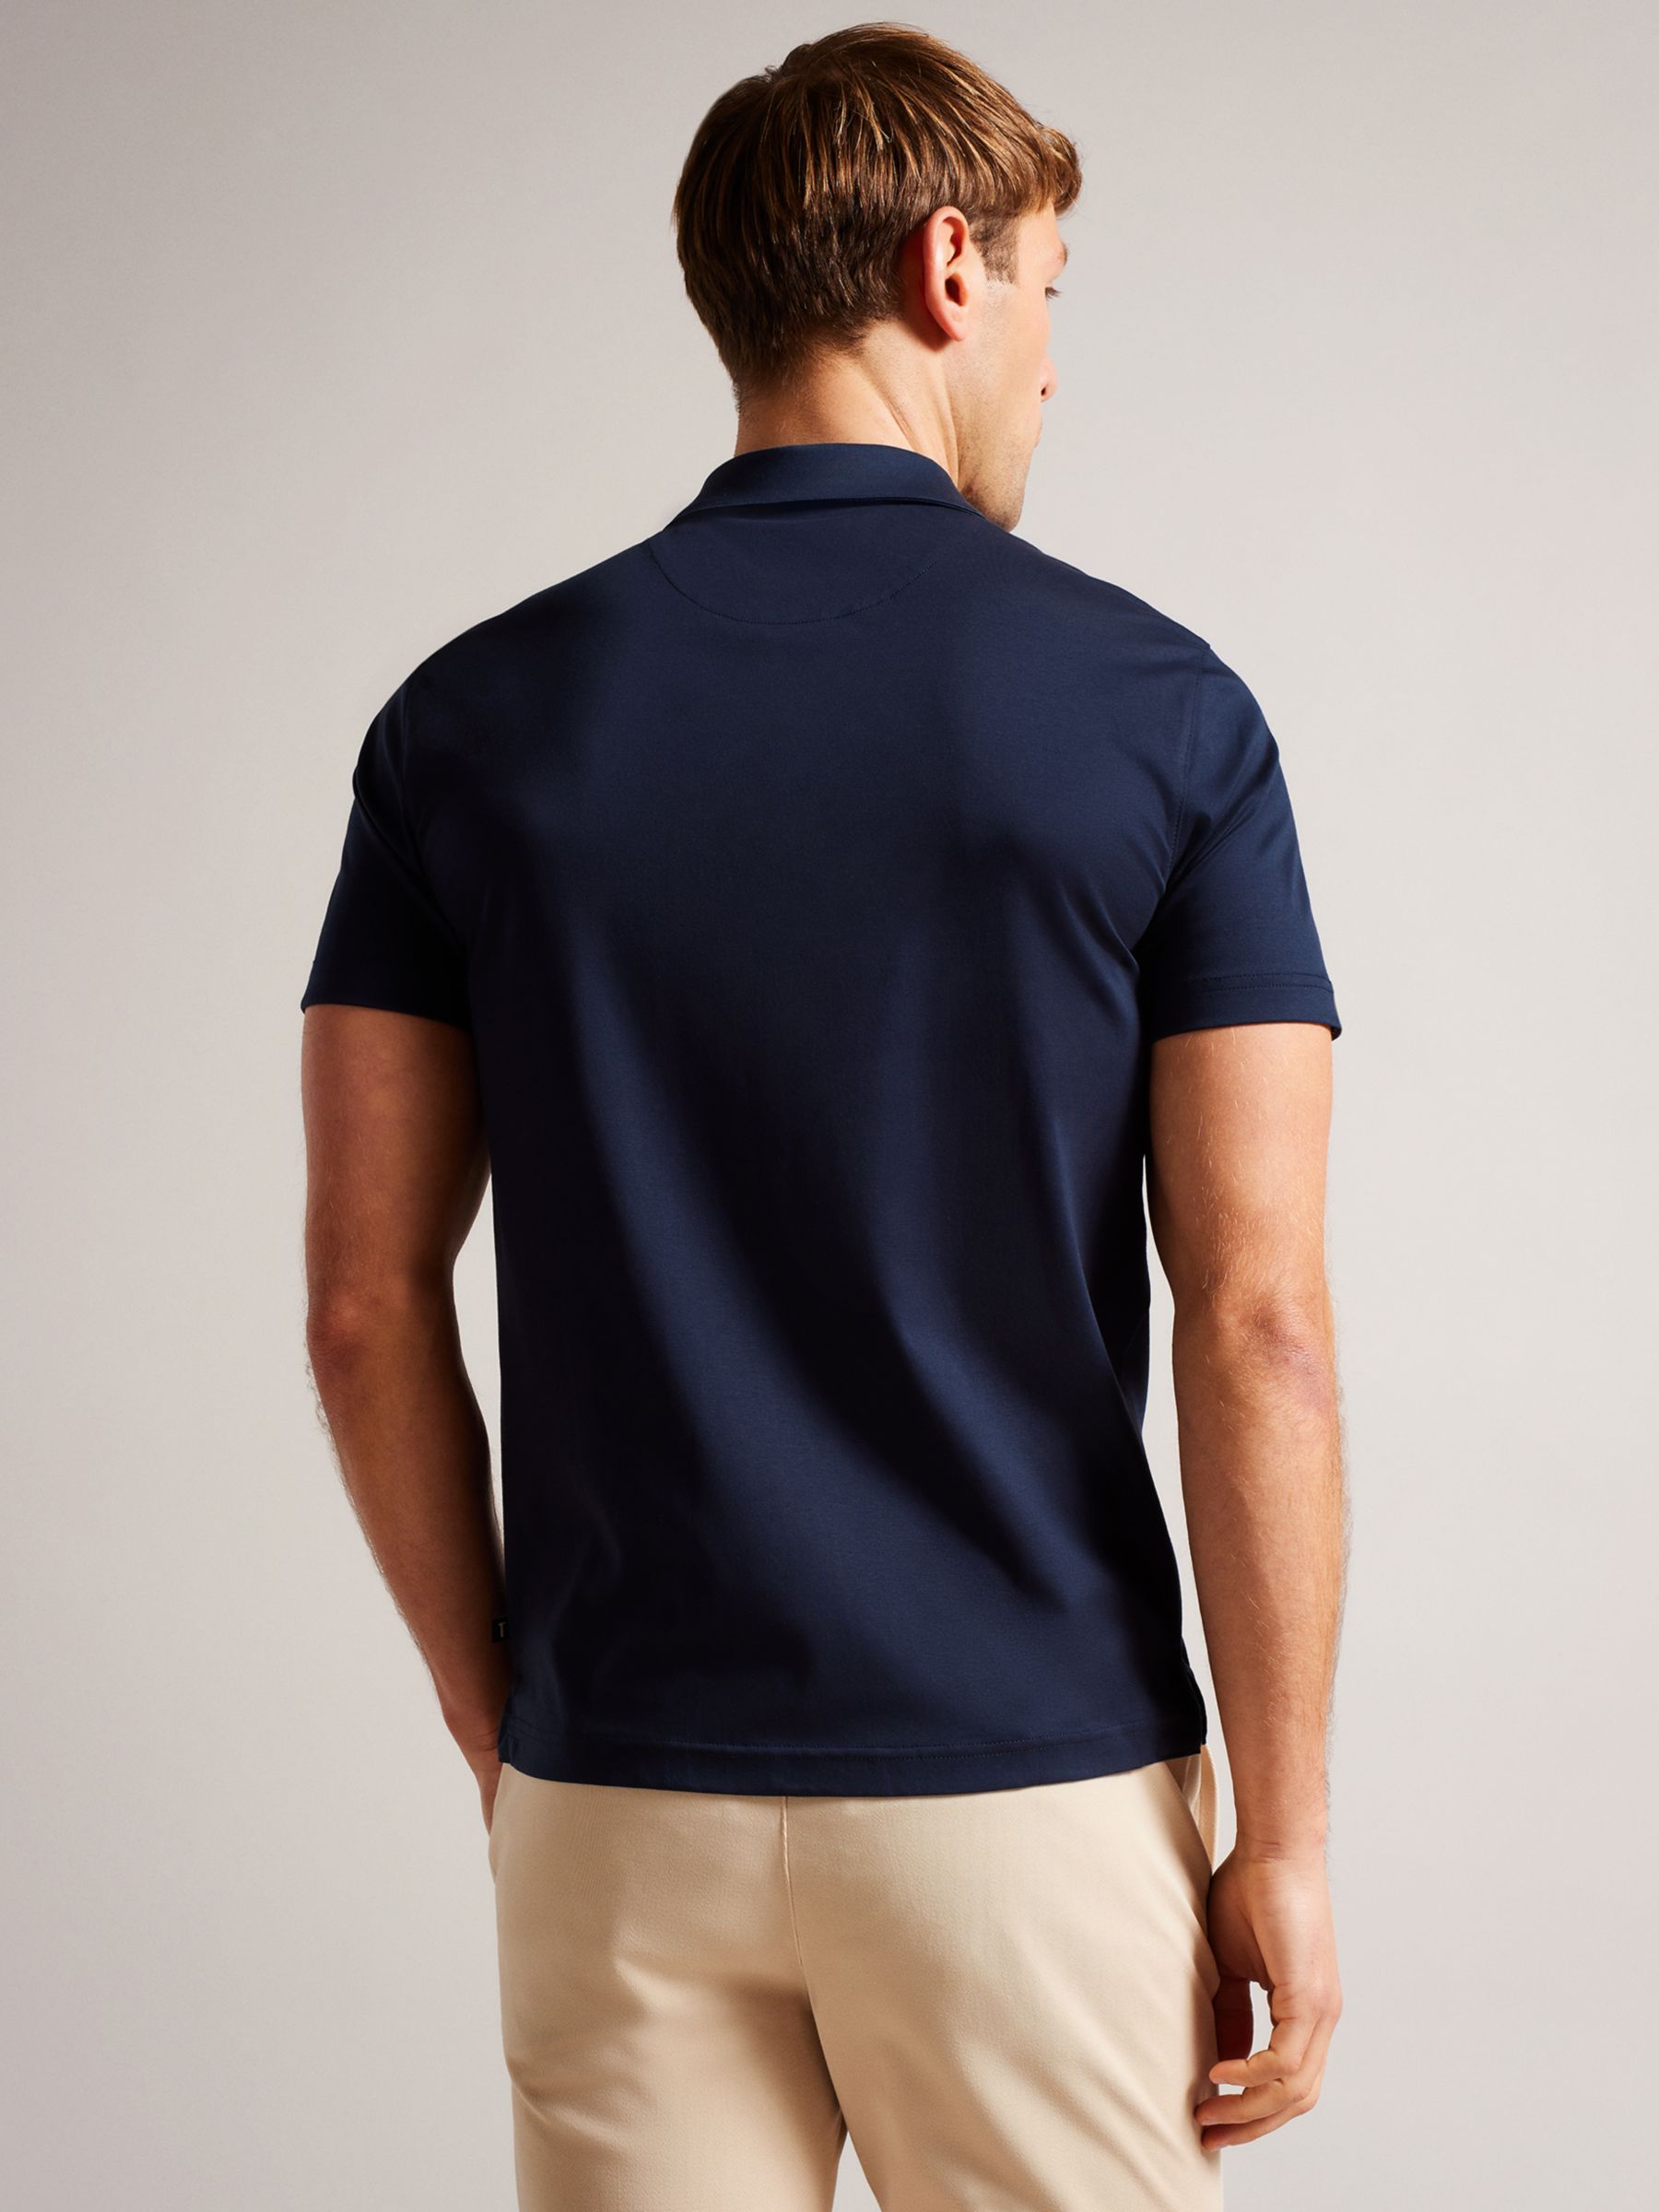 Ted Baker Zeiter Slim Fit Polo Shirt, Navy, XS